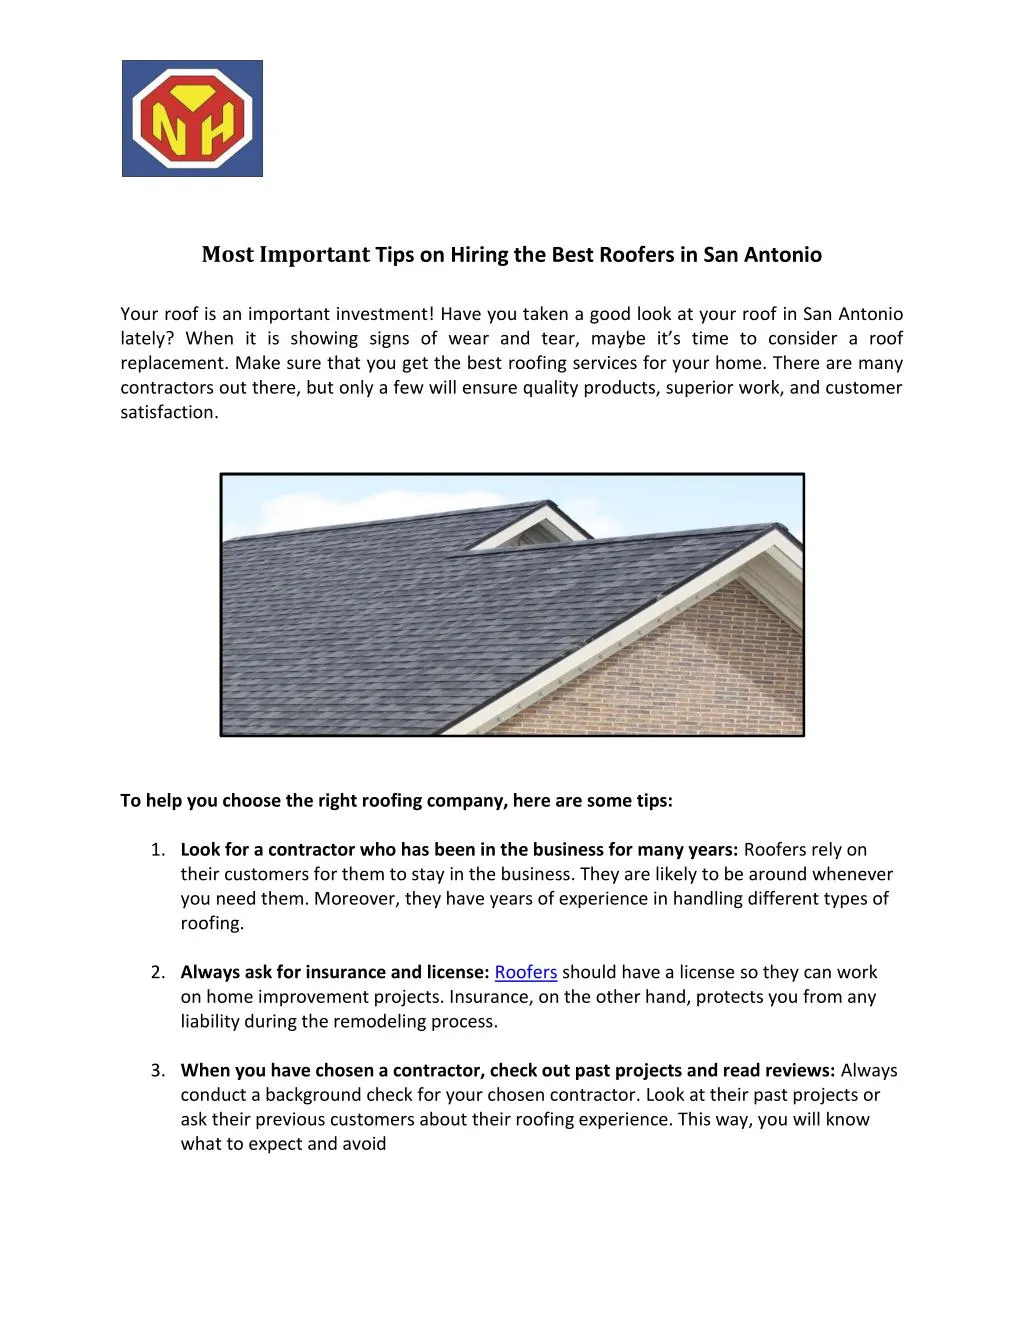 most important tips on hiring the best roofers